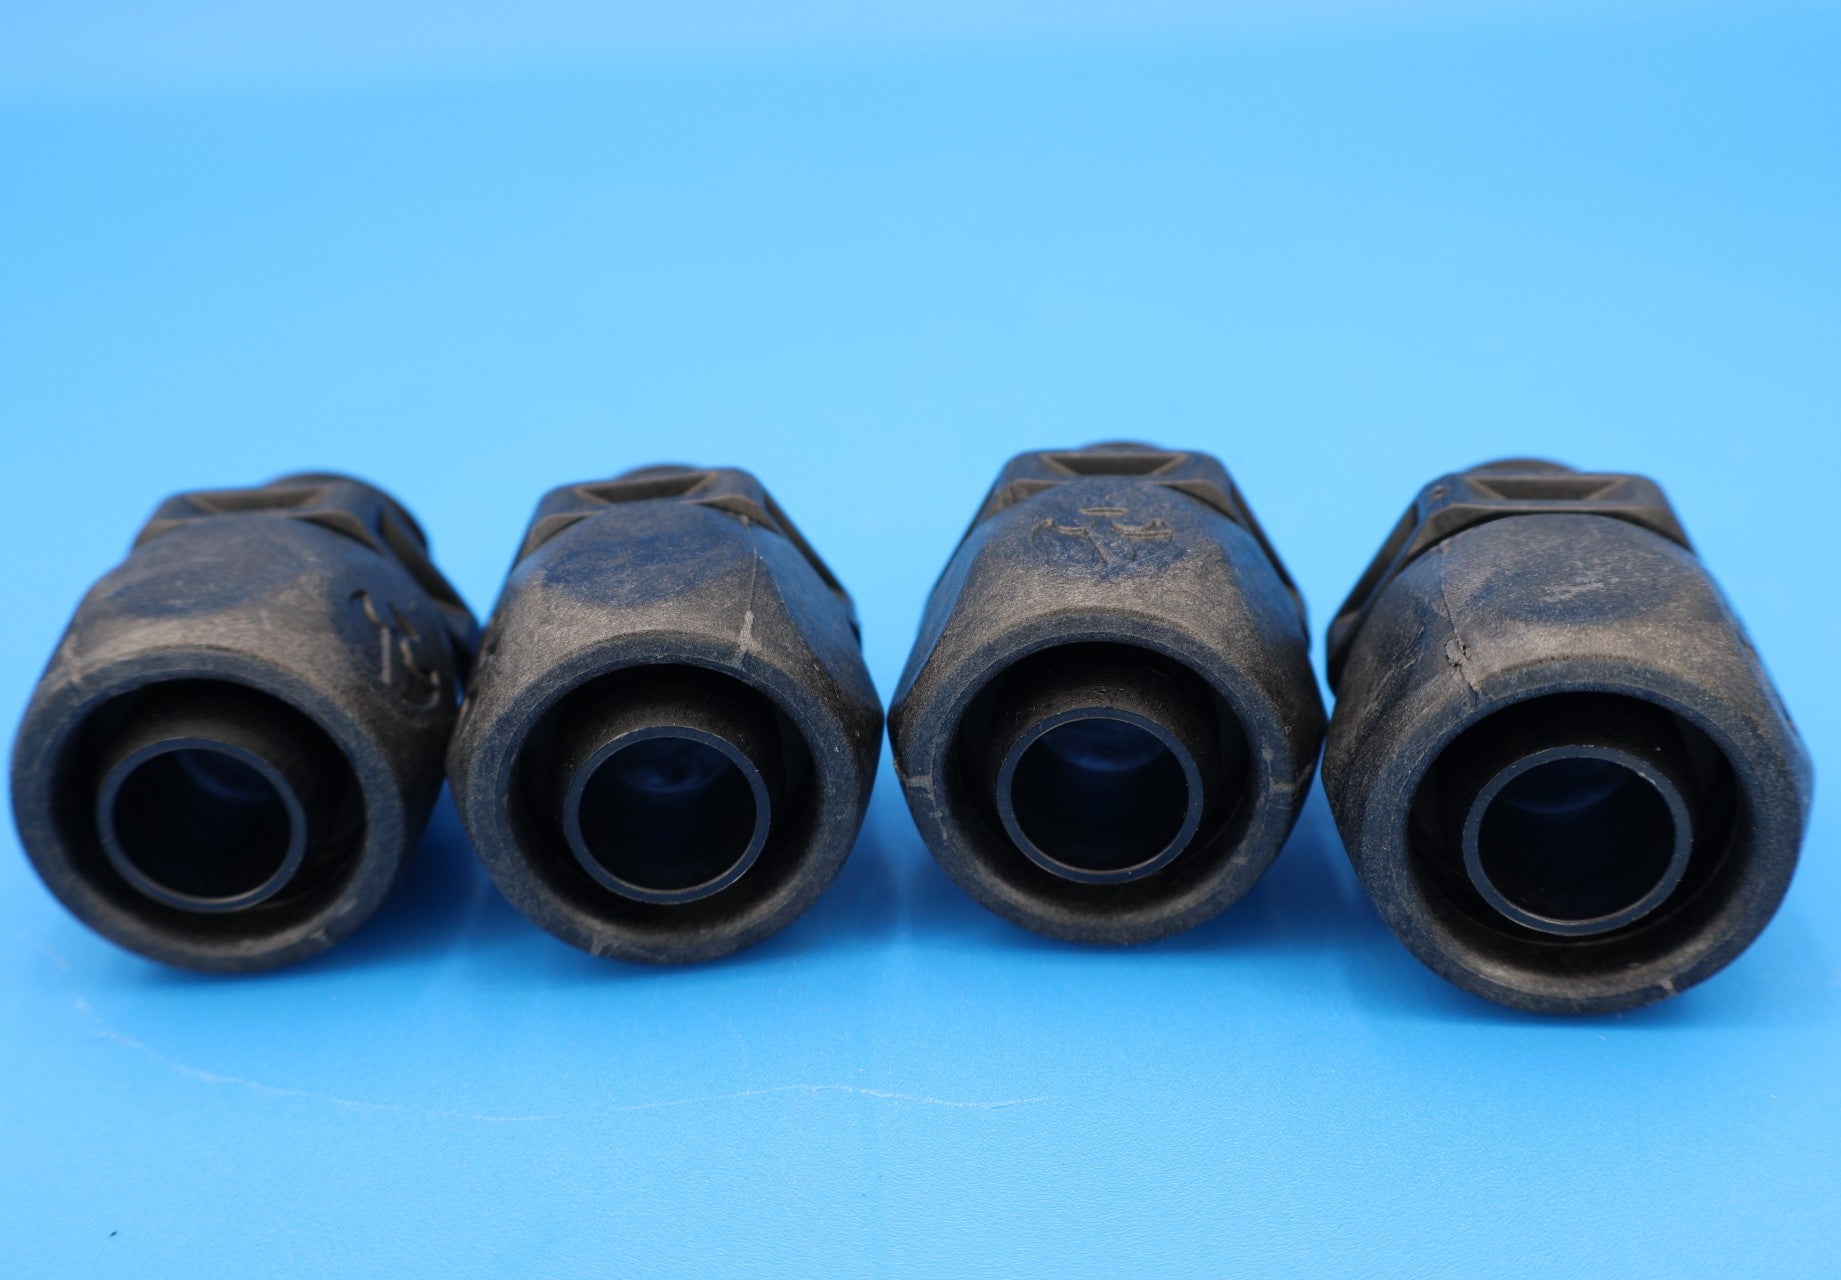 Jandy (Polaris) Booster Pump Black Quick Connect Fittings 4-Pack R0621000 - Pool Pump Parts - img-2